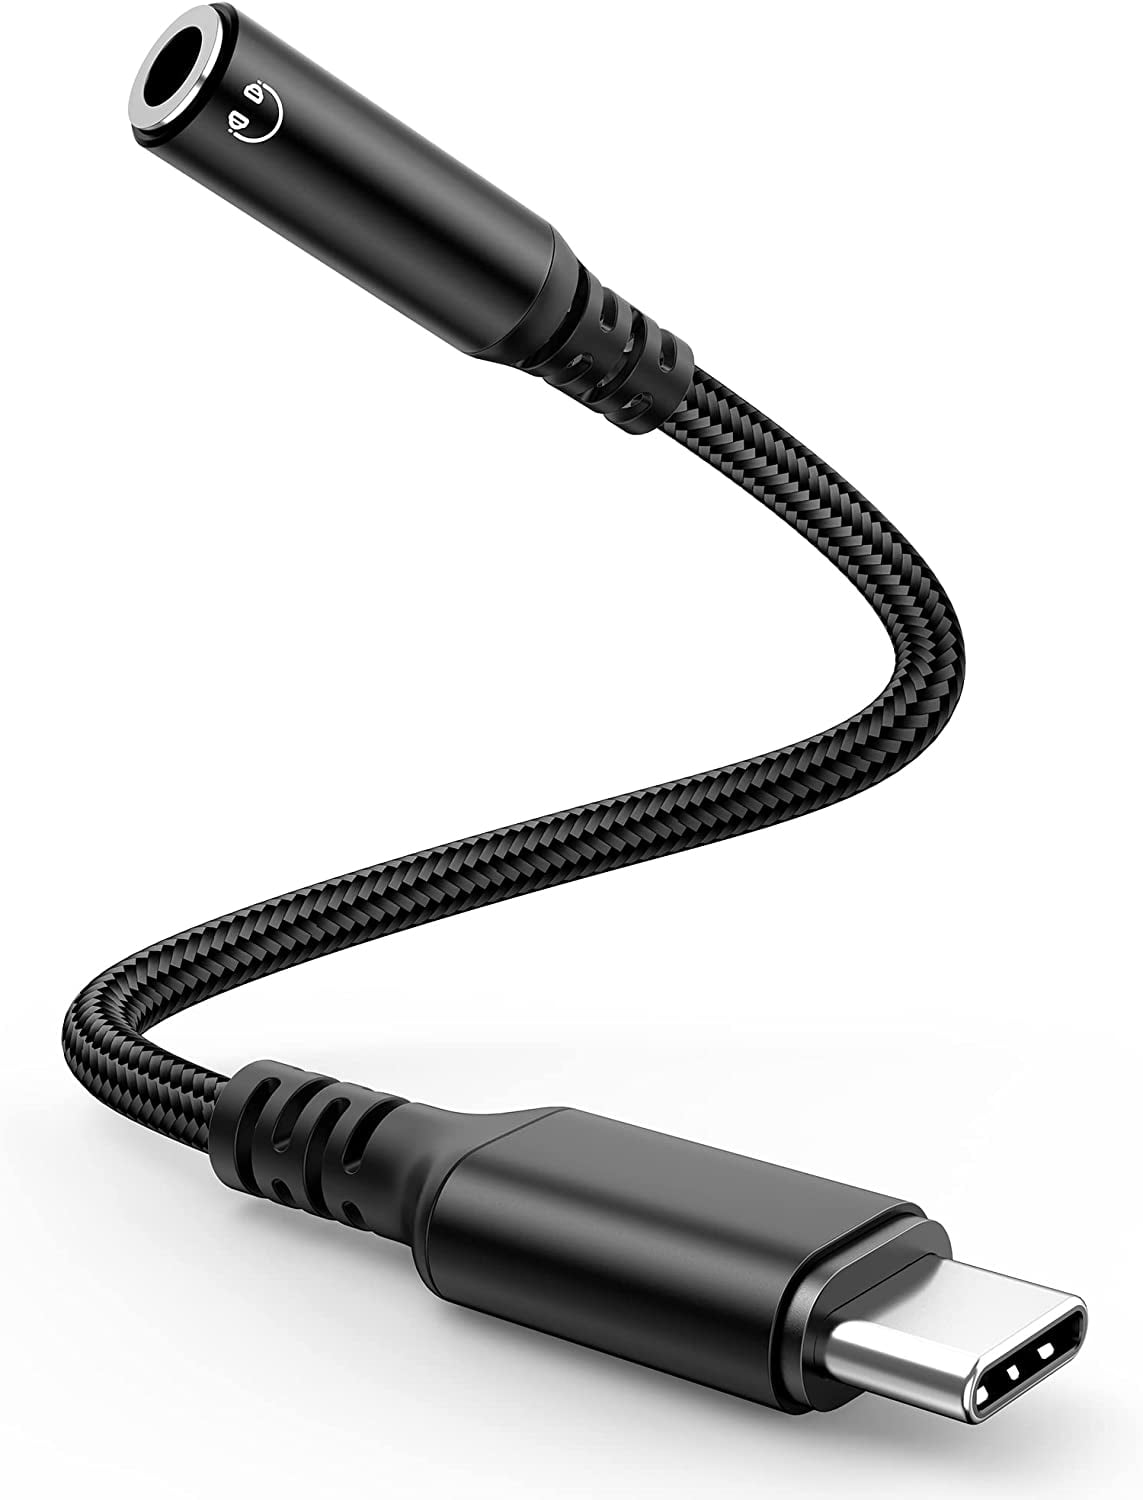 USB C to 3.5mm Headphones Audio Jack Adapter, USB Type C to Aux Dongle Cable, Compatible with Samsung S23/S22/S21/S20/S20+ Ultra, Note 20/10, Pixel, iPad Pro, MacBook, 1 Pack, Black - Walmart.com